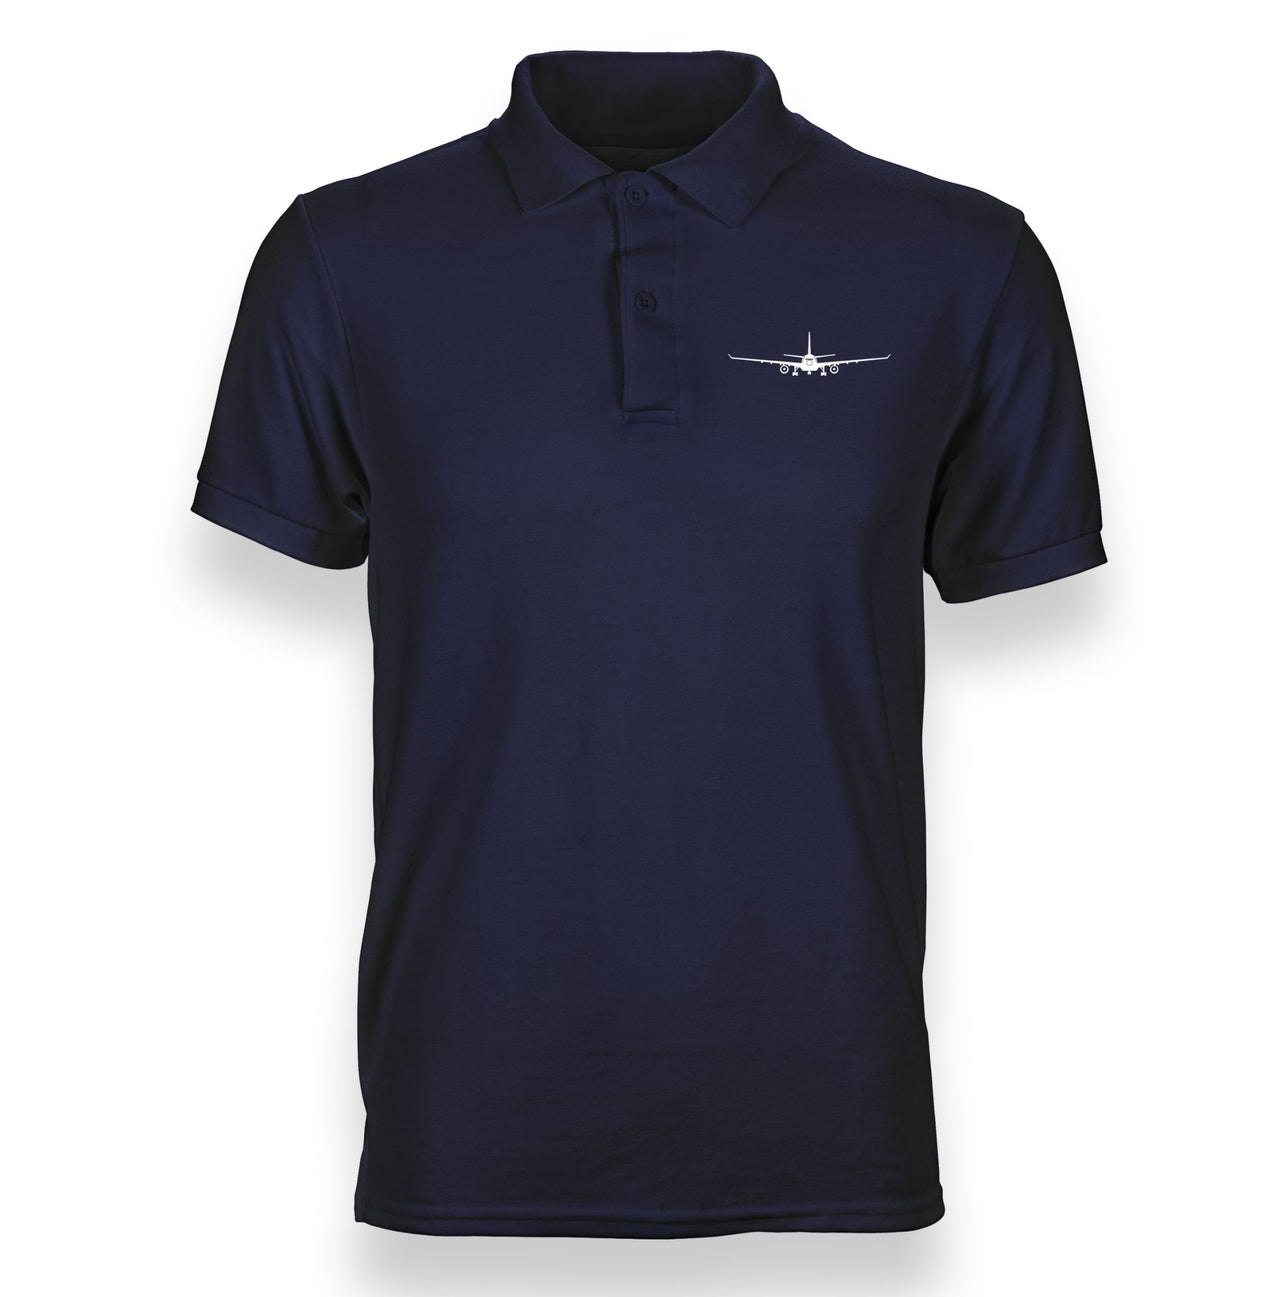 Airbus A330 Silhouette Designed "WOMEN" Polo T-Shirts